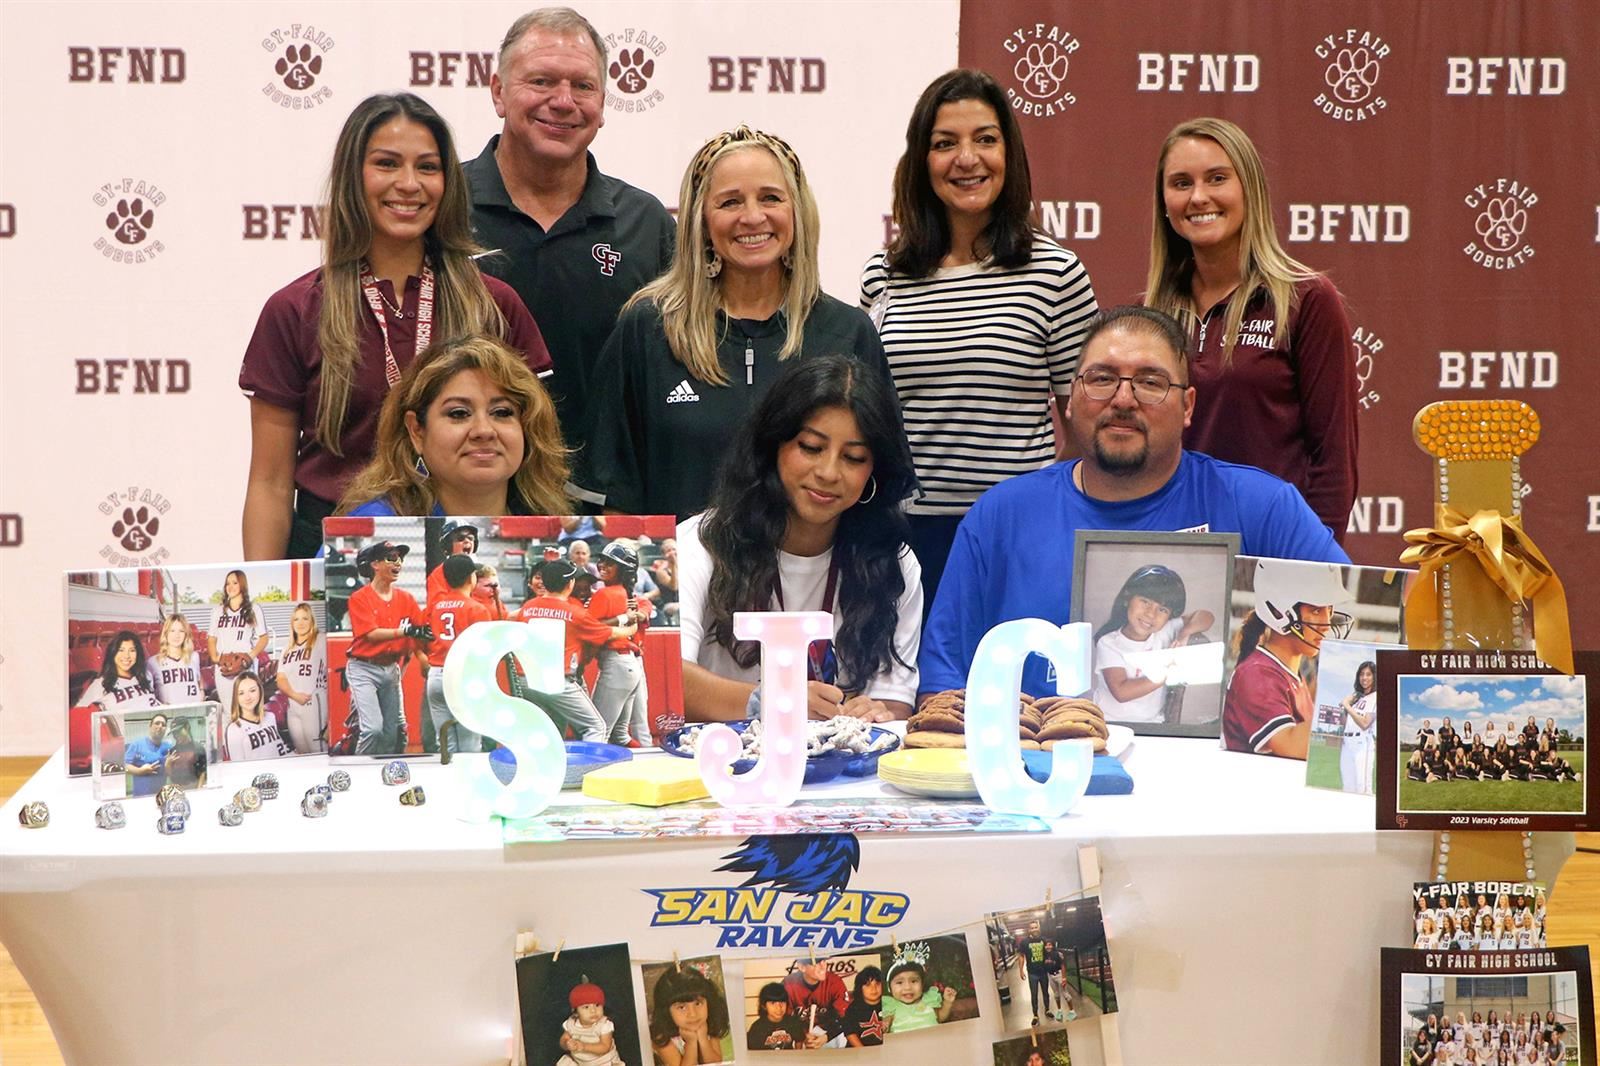 Cy-Fair High School senior Yadira Ortiz, seated center, signed a letter of intent to play softball at San Jacinto College.